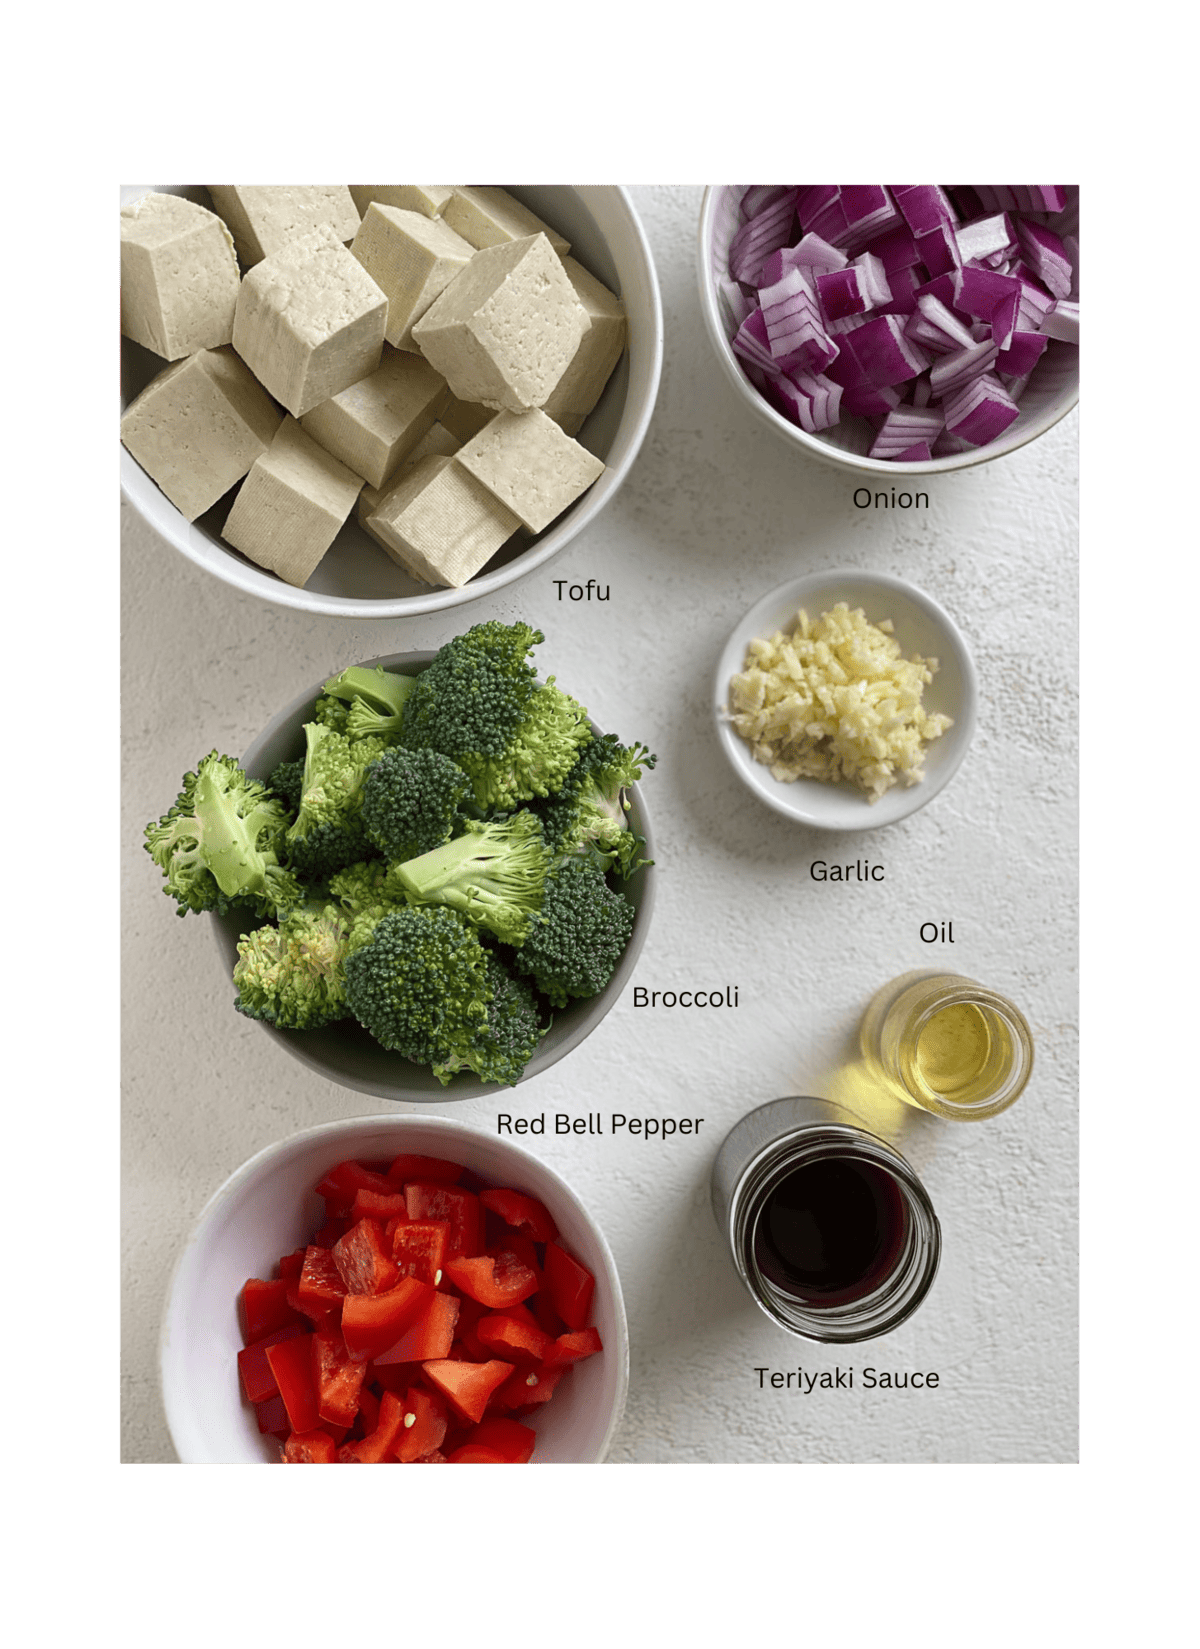 ingredients for Quick Teriyaki Tofu Stir Fry measured out against a white surface